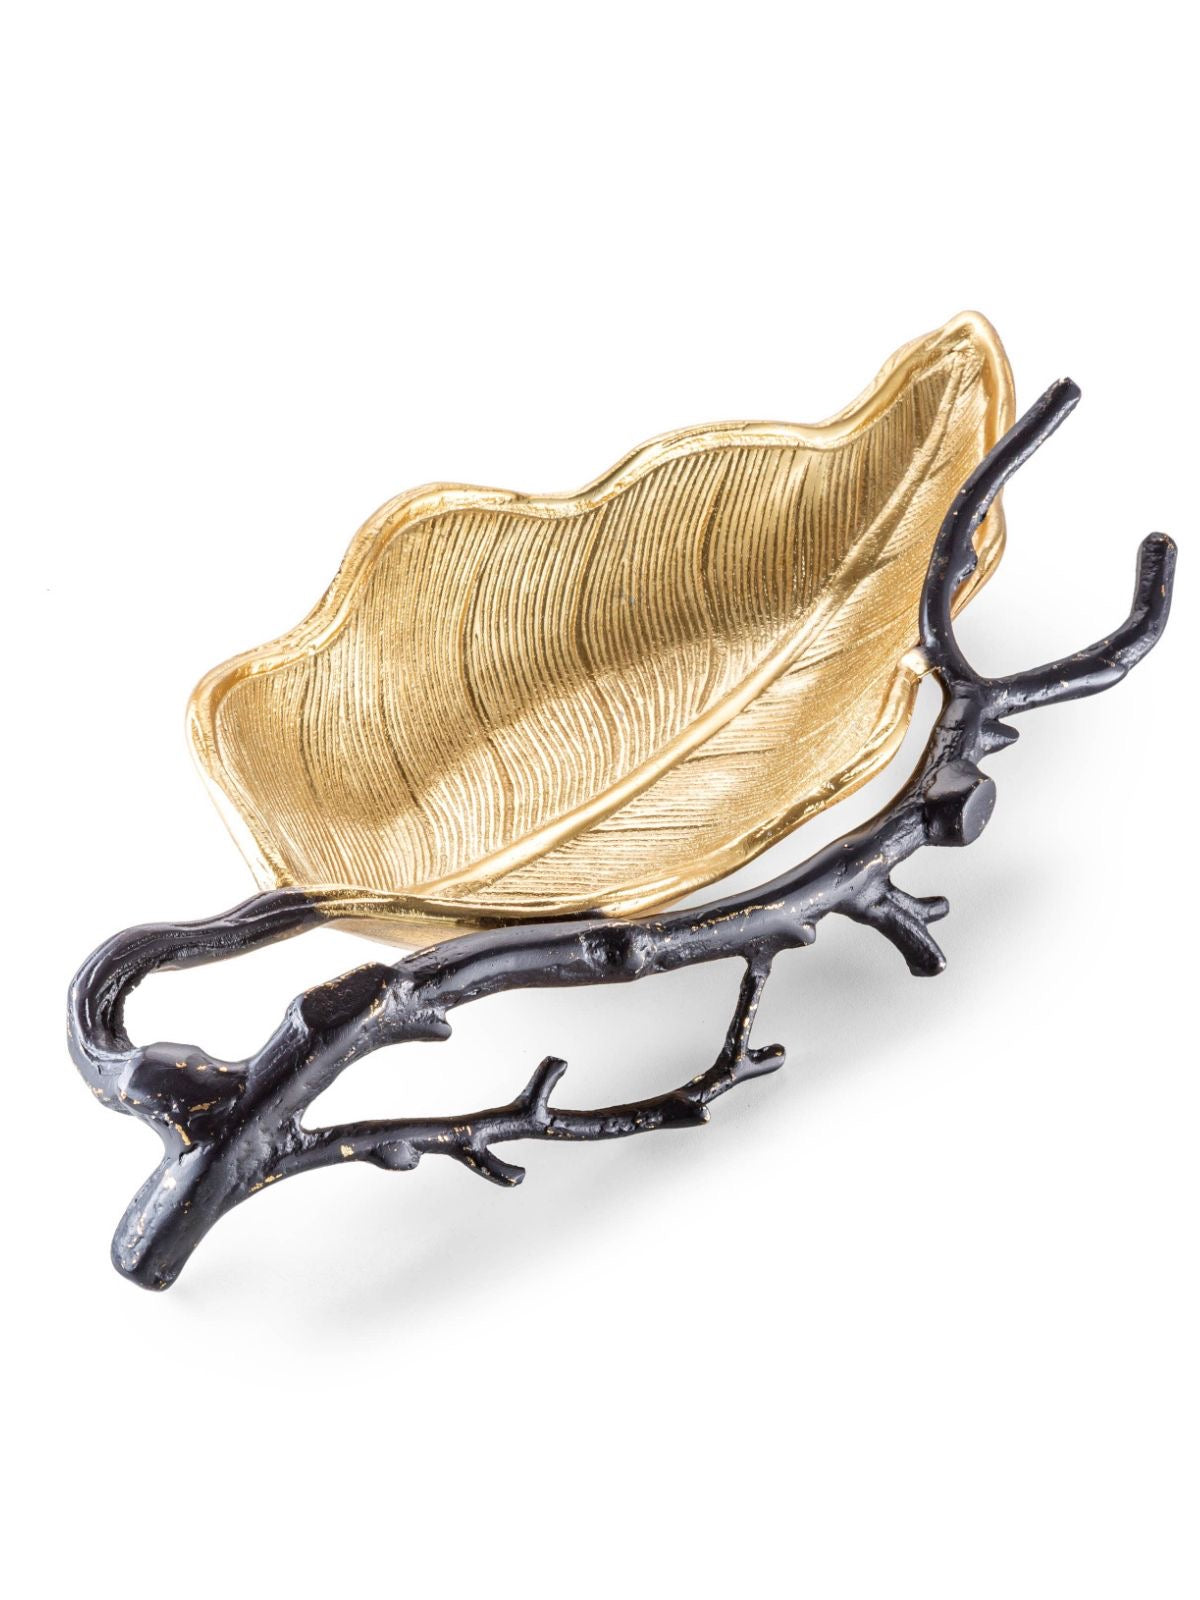 This 15.75 inch Caramella Gold Leaf Dish has a fine and elegant black branch design which is beautiful crafted from stainless steel available at KYA Home Decor 